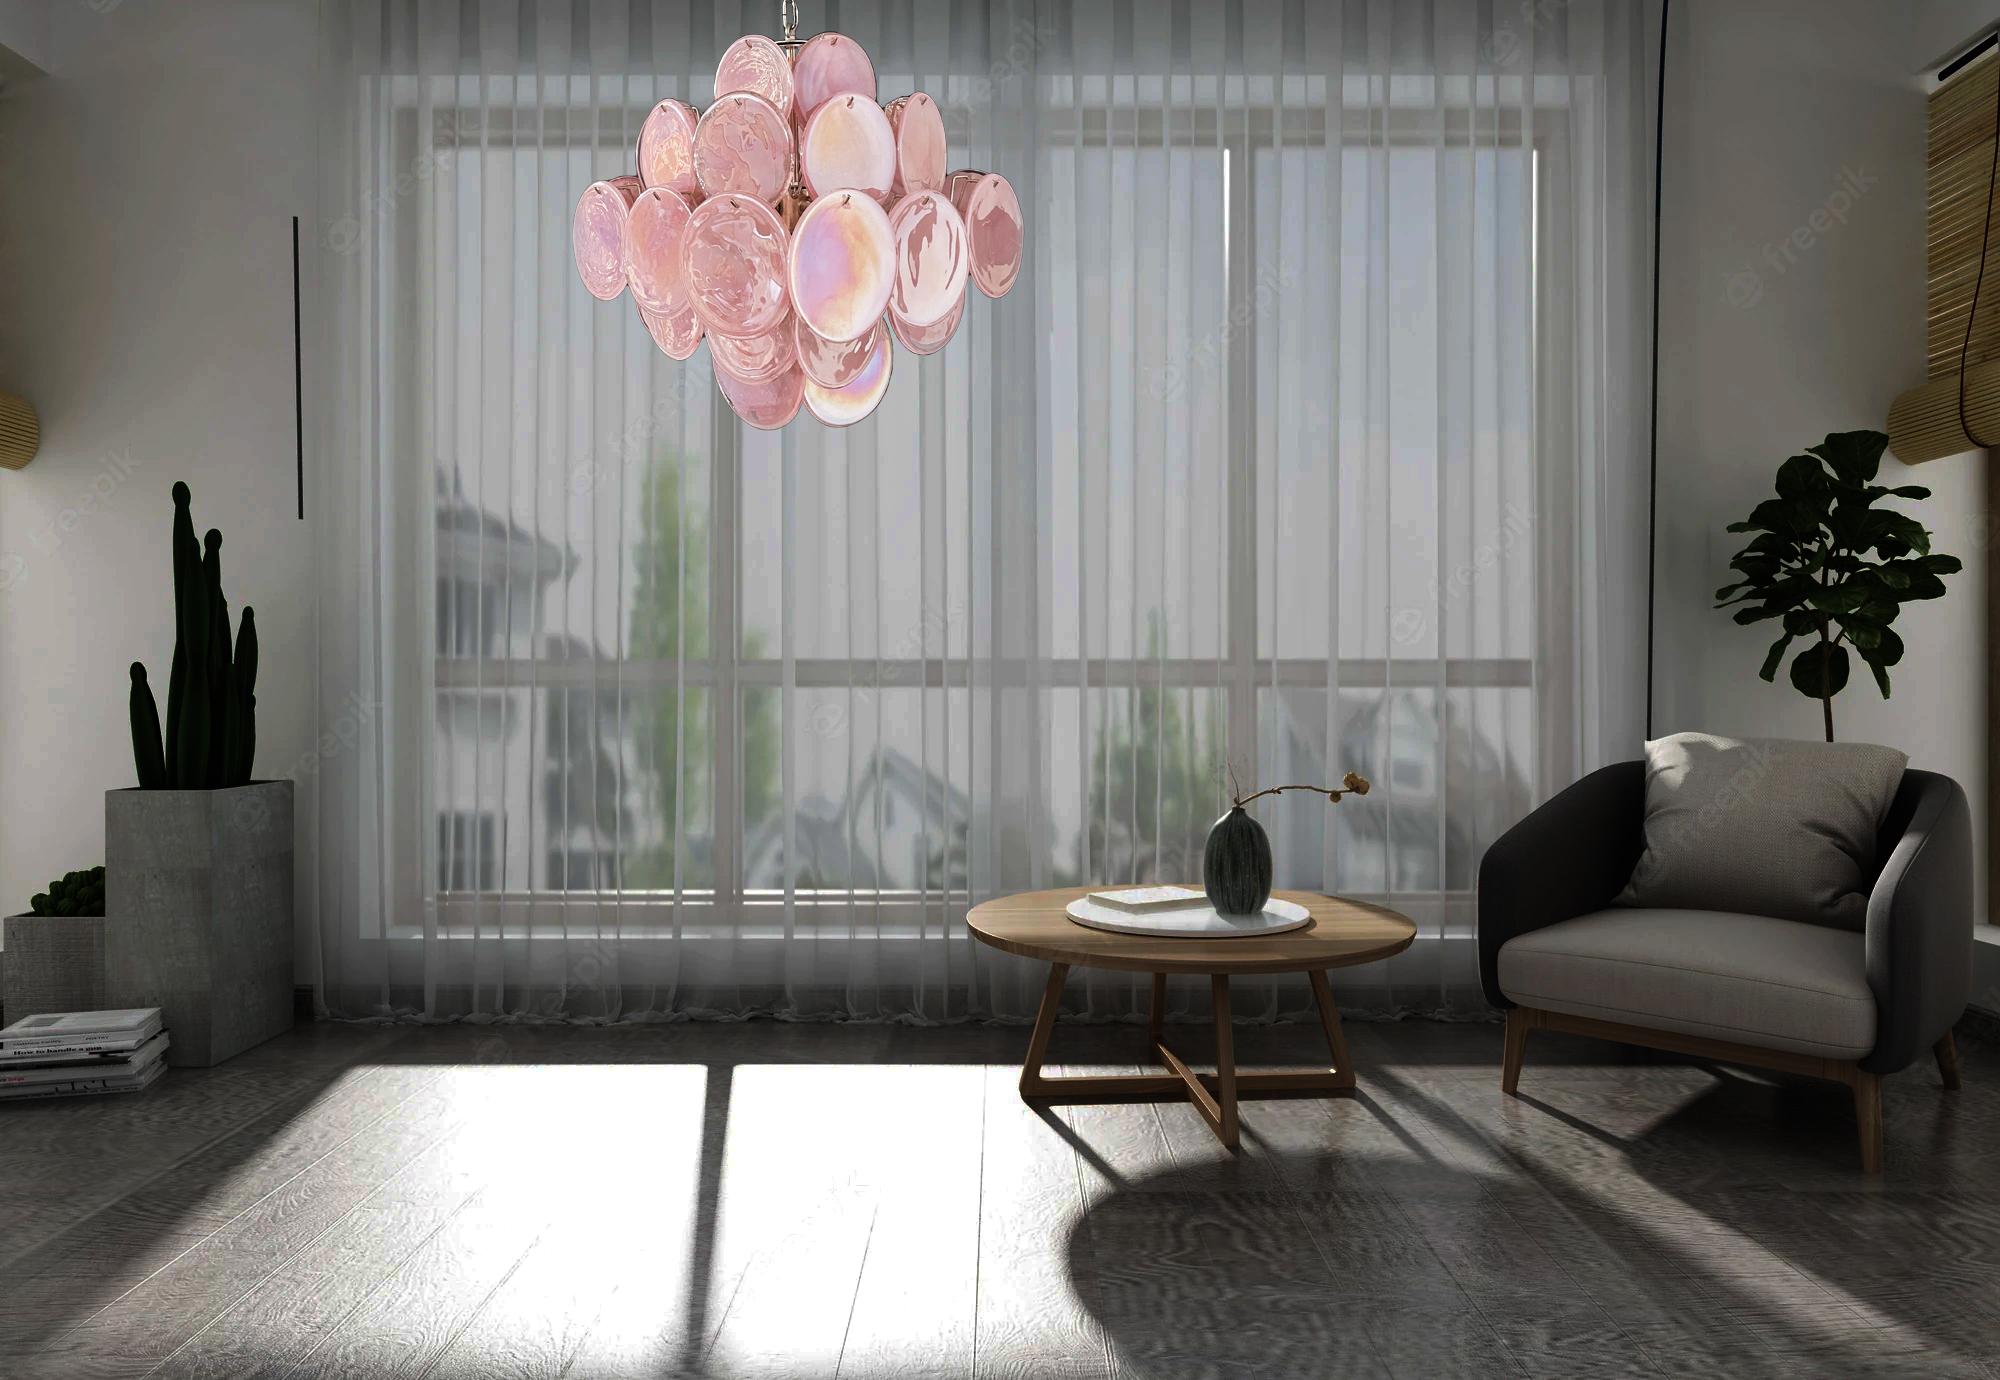 Vintage Italian Murano chandeliers in Vistosi style. Each chandelier has 36 fantastic iridescent alabaster pink discs in a nickel metal frame.
Period: late 20th century
Dimensions: 44.50 inches (150 cm) height with chain; 19.40 inches (50 cm)